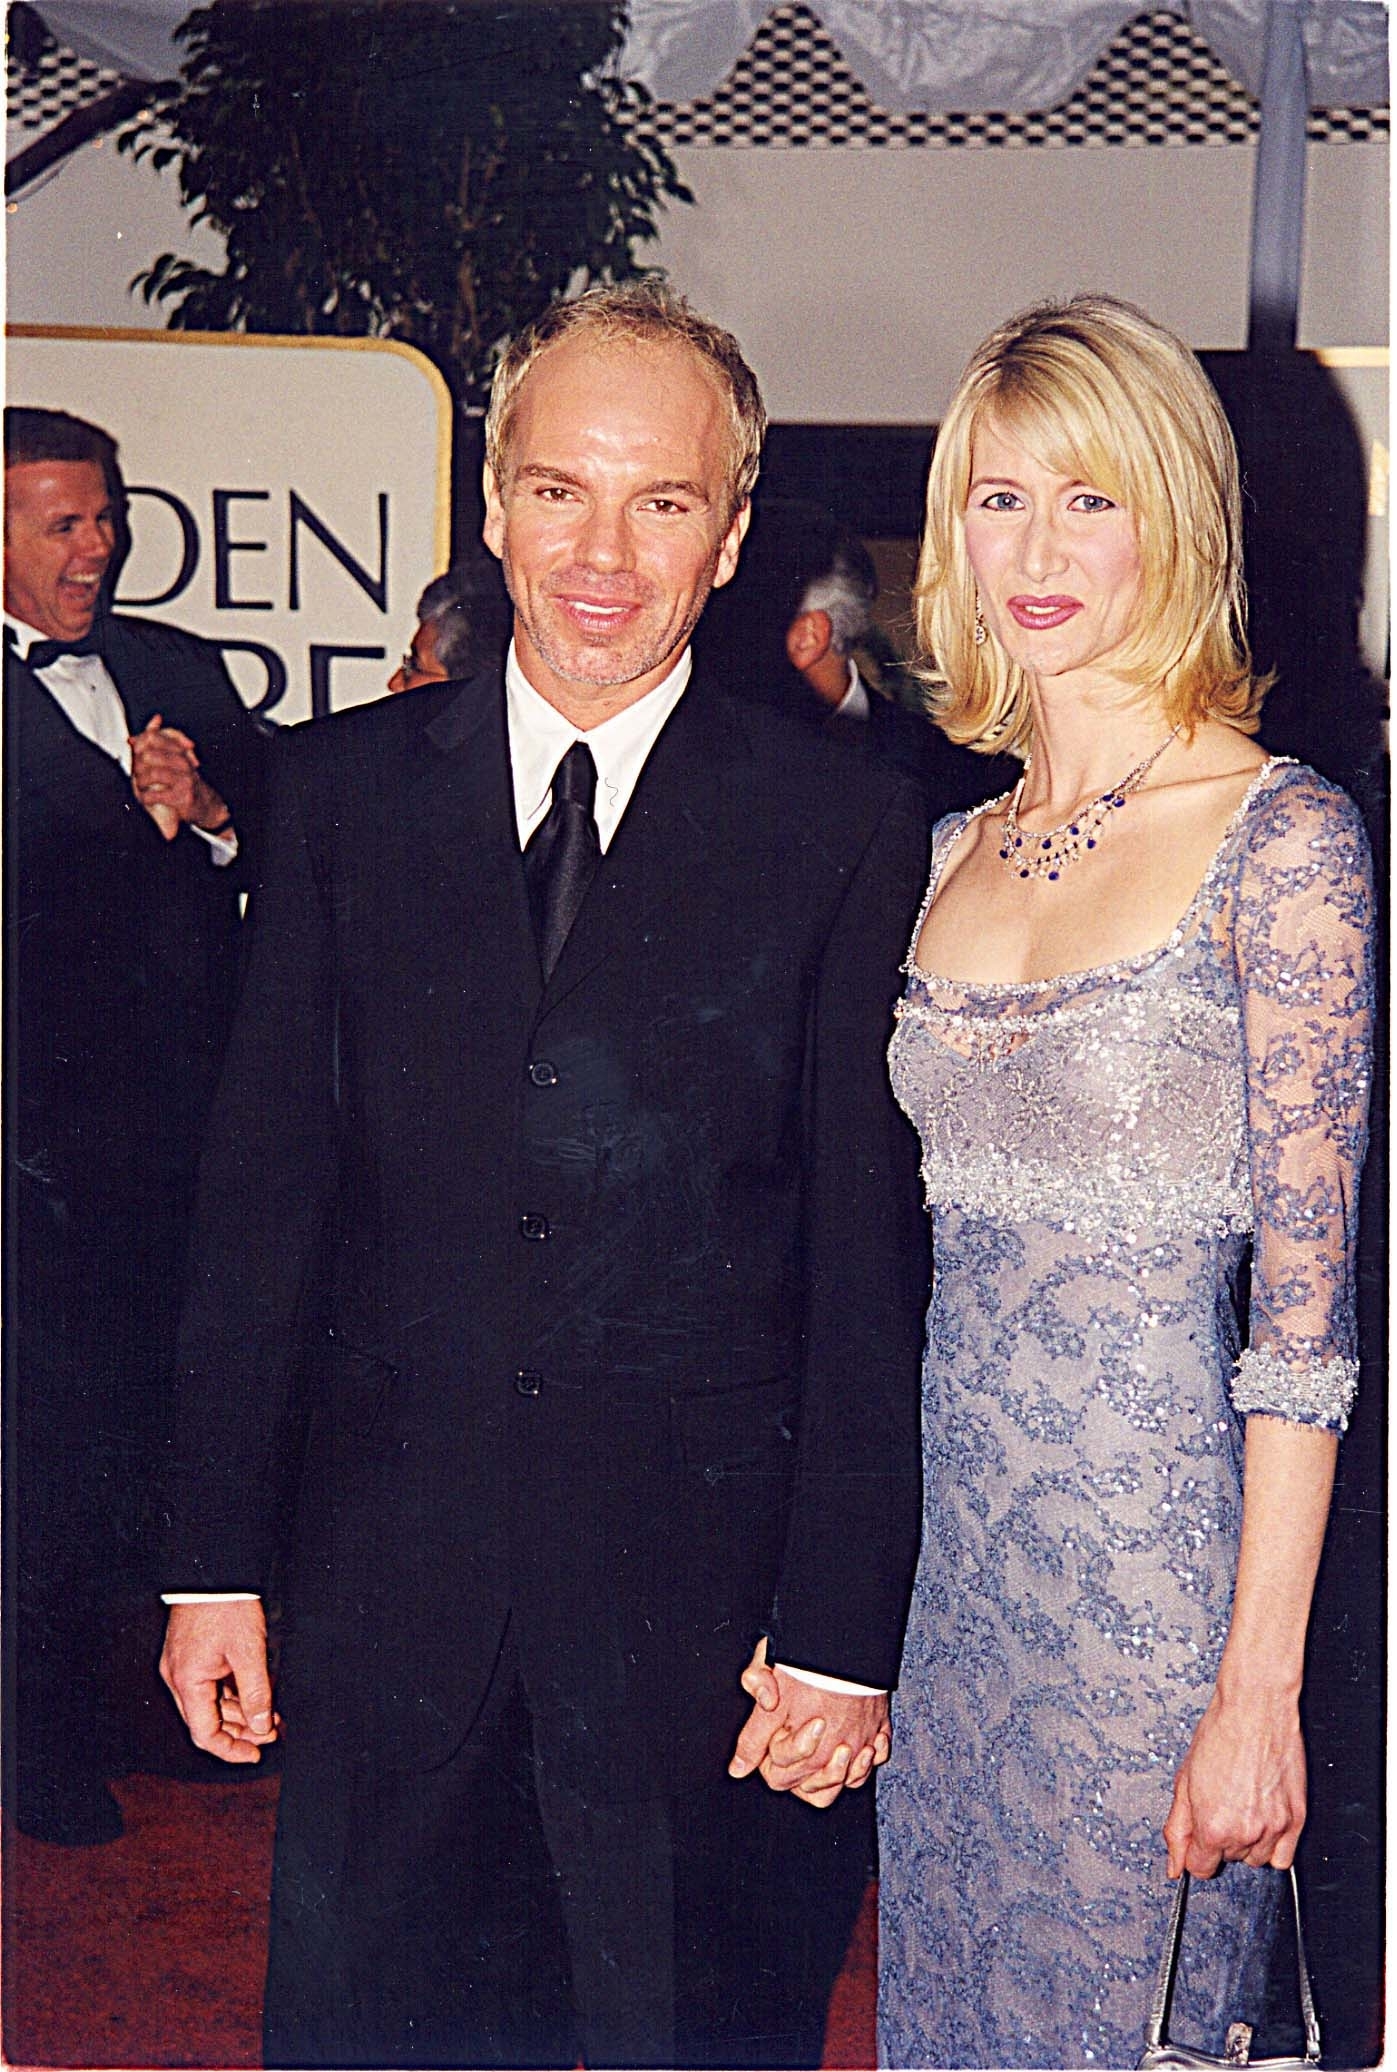 Billy Bob in a black suit and Laura in a beaded lace dress, holding hands on the red carpet